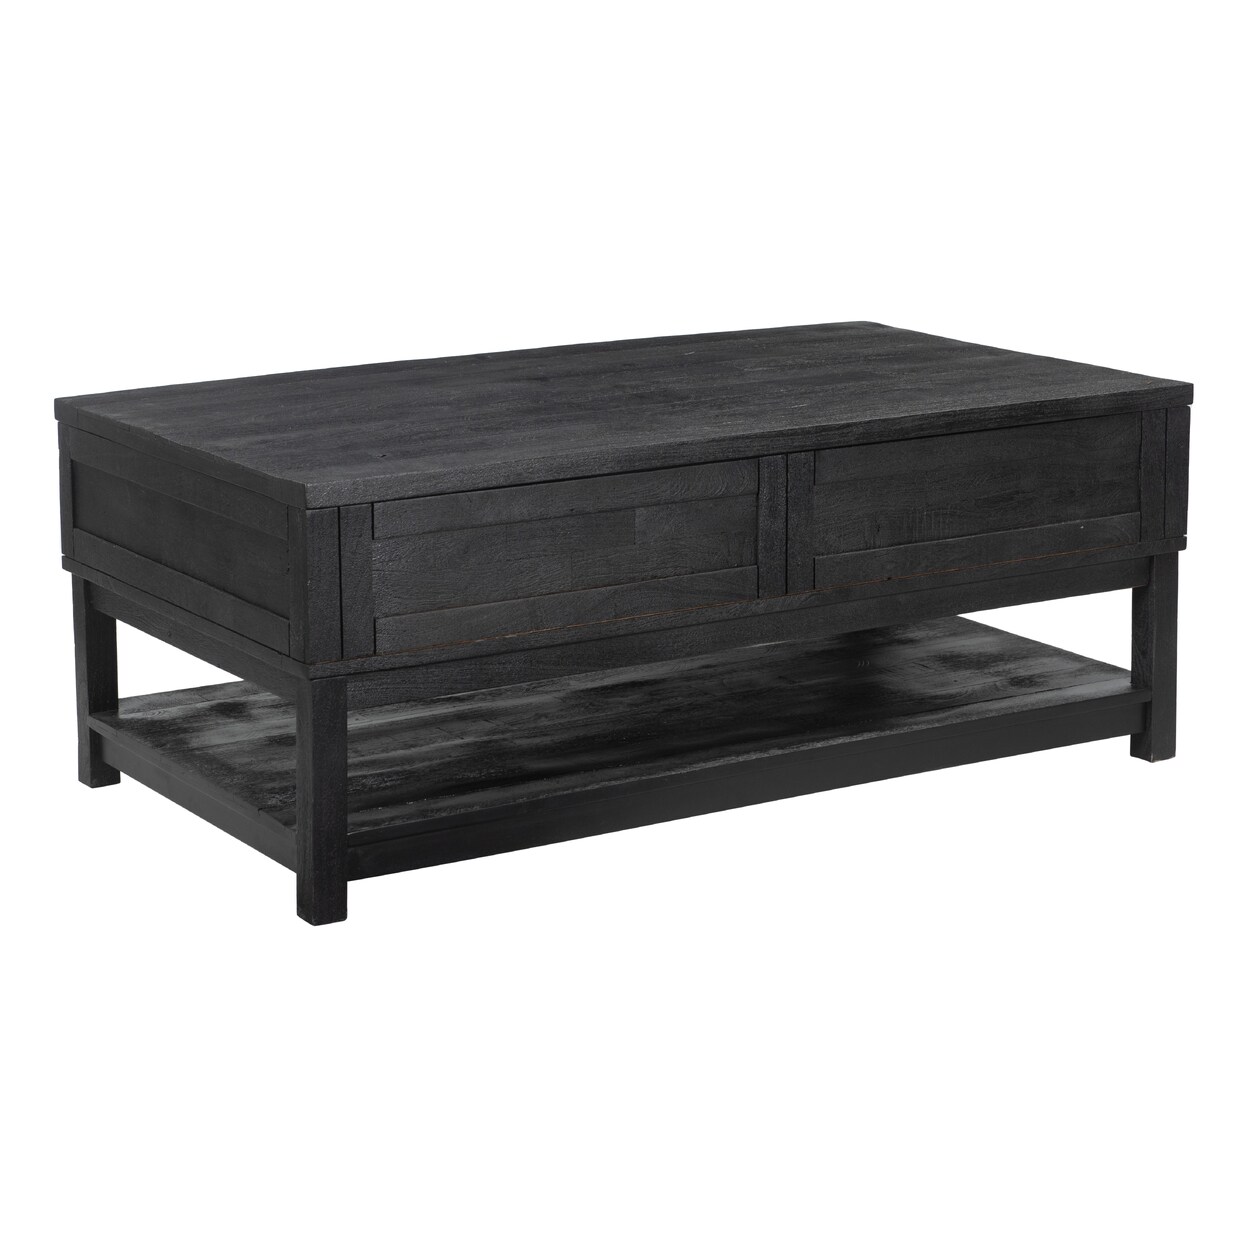 Zuo Modern Contemporary Inc. Surat Lift Top Coffee Table Black